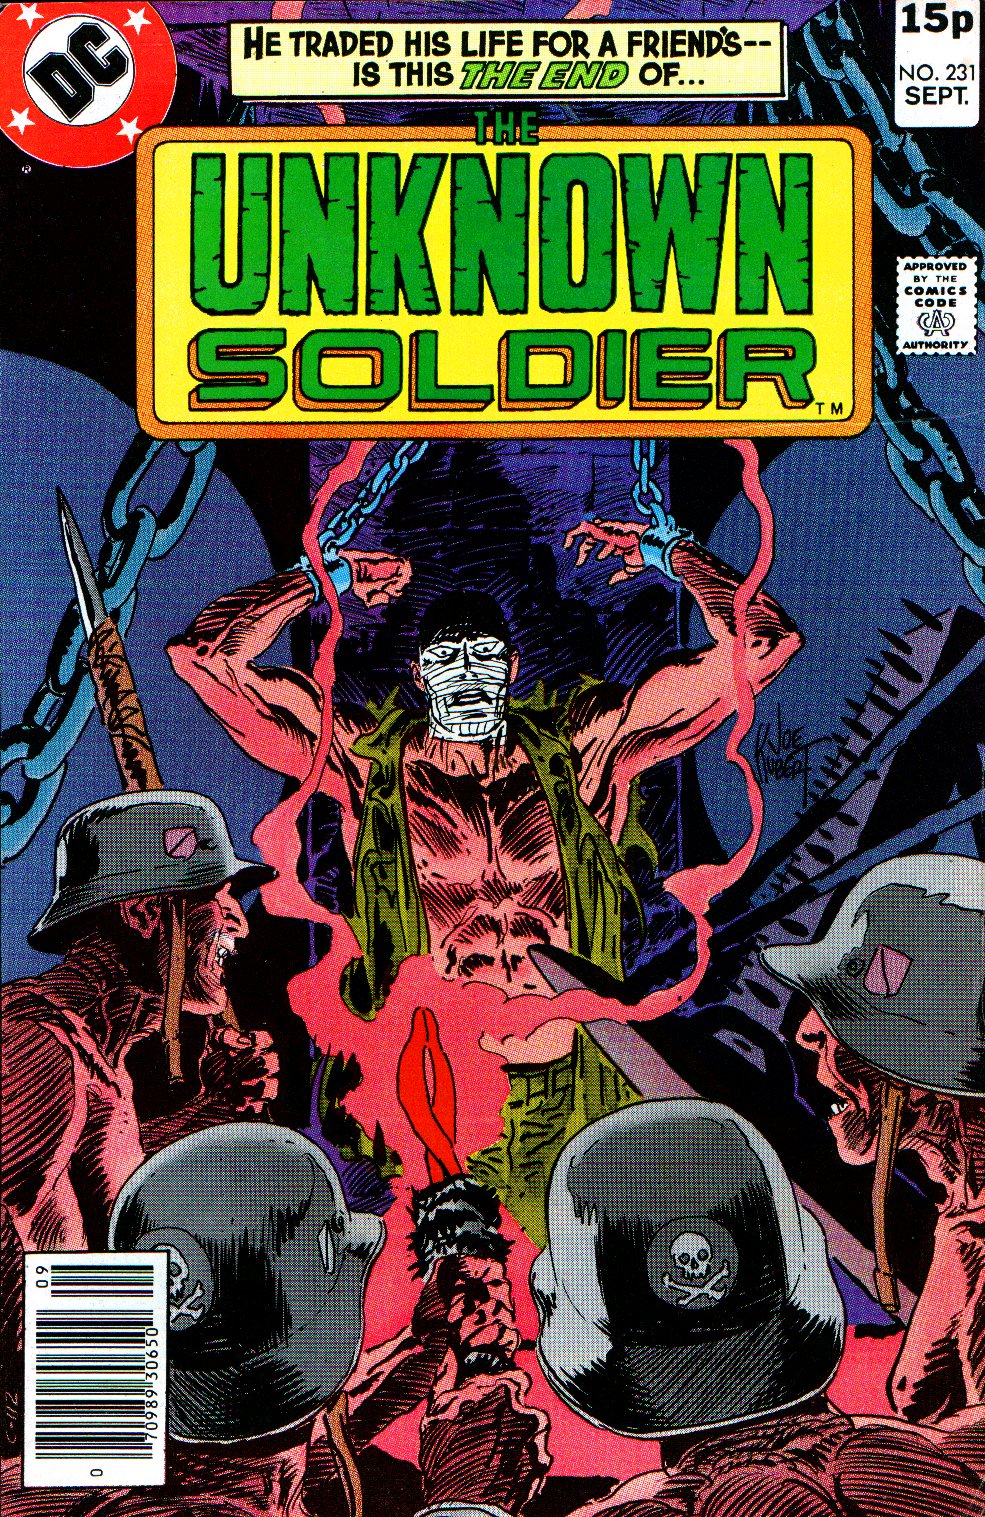 Read online Unknown Soldier (1977) comic -  Issue #231 - 1